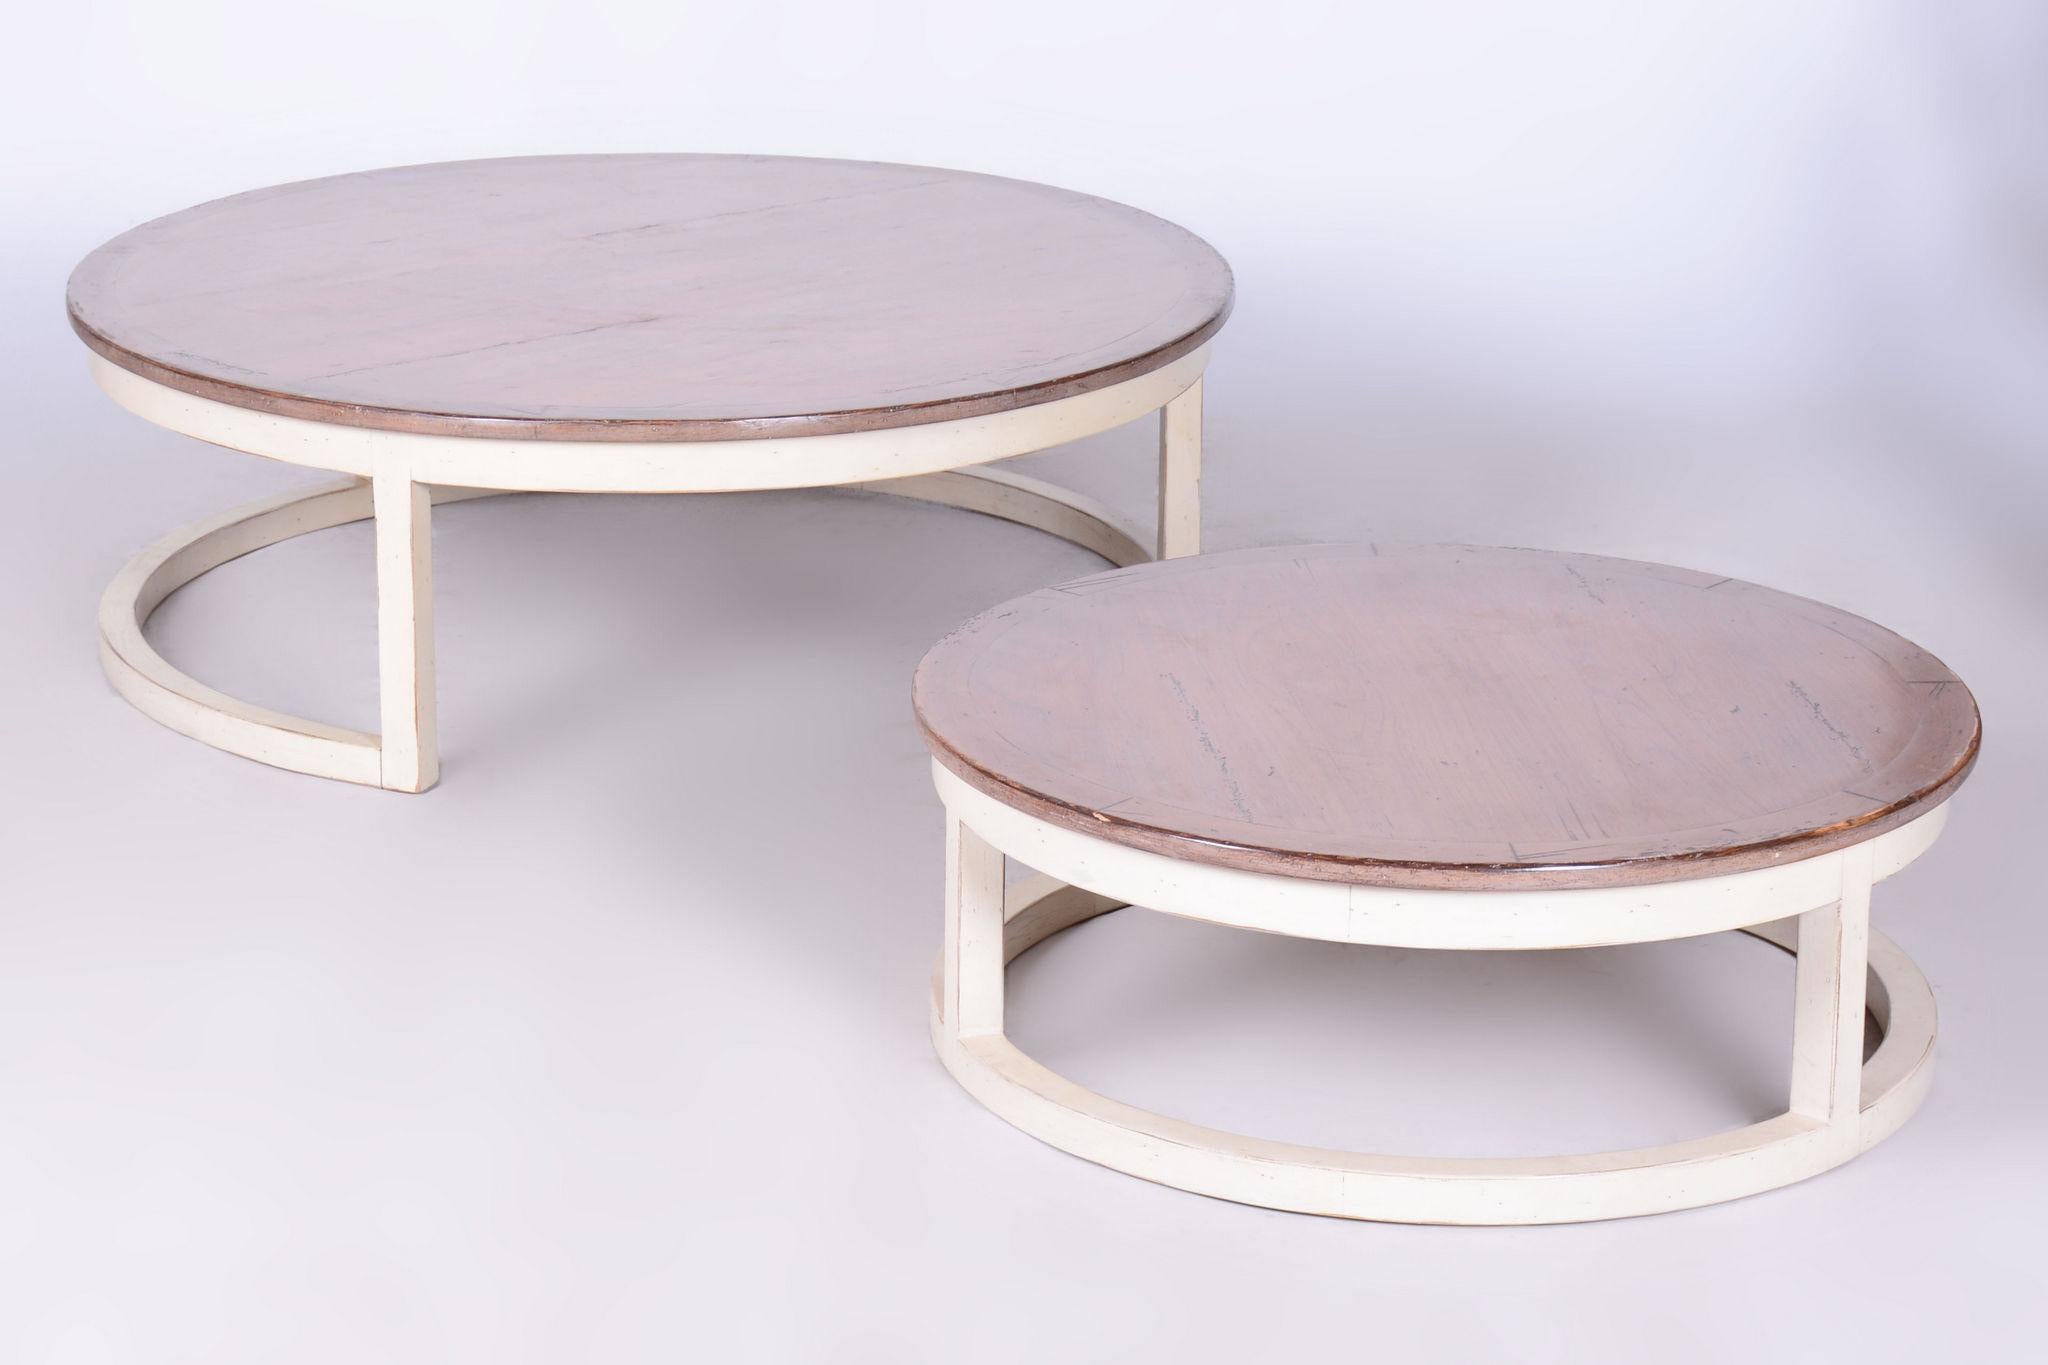 Mid-20th Century Original Midcentury Coffee Nest Tables, Cherry Wood, France, 1960s For Sale